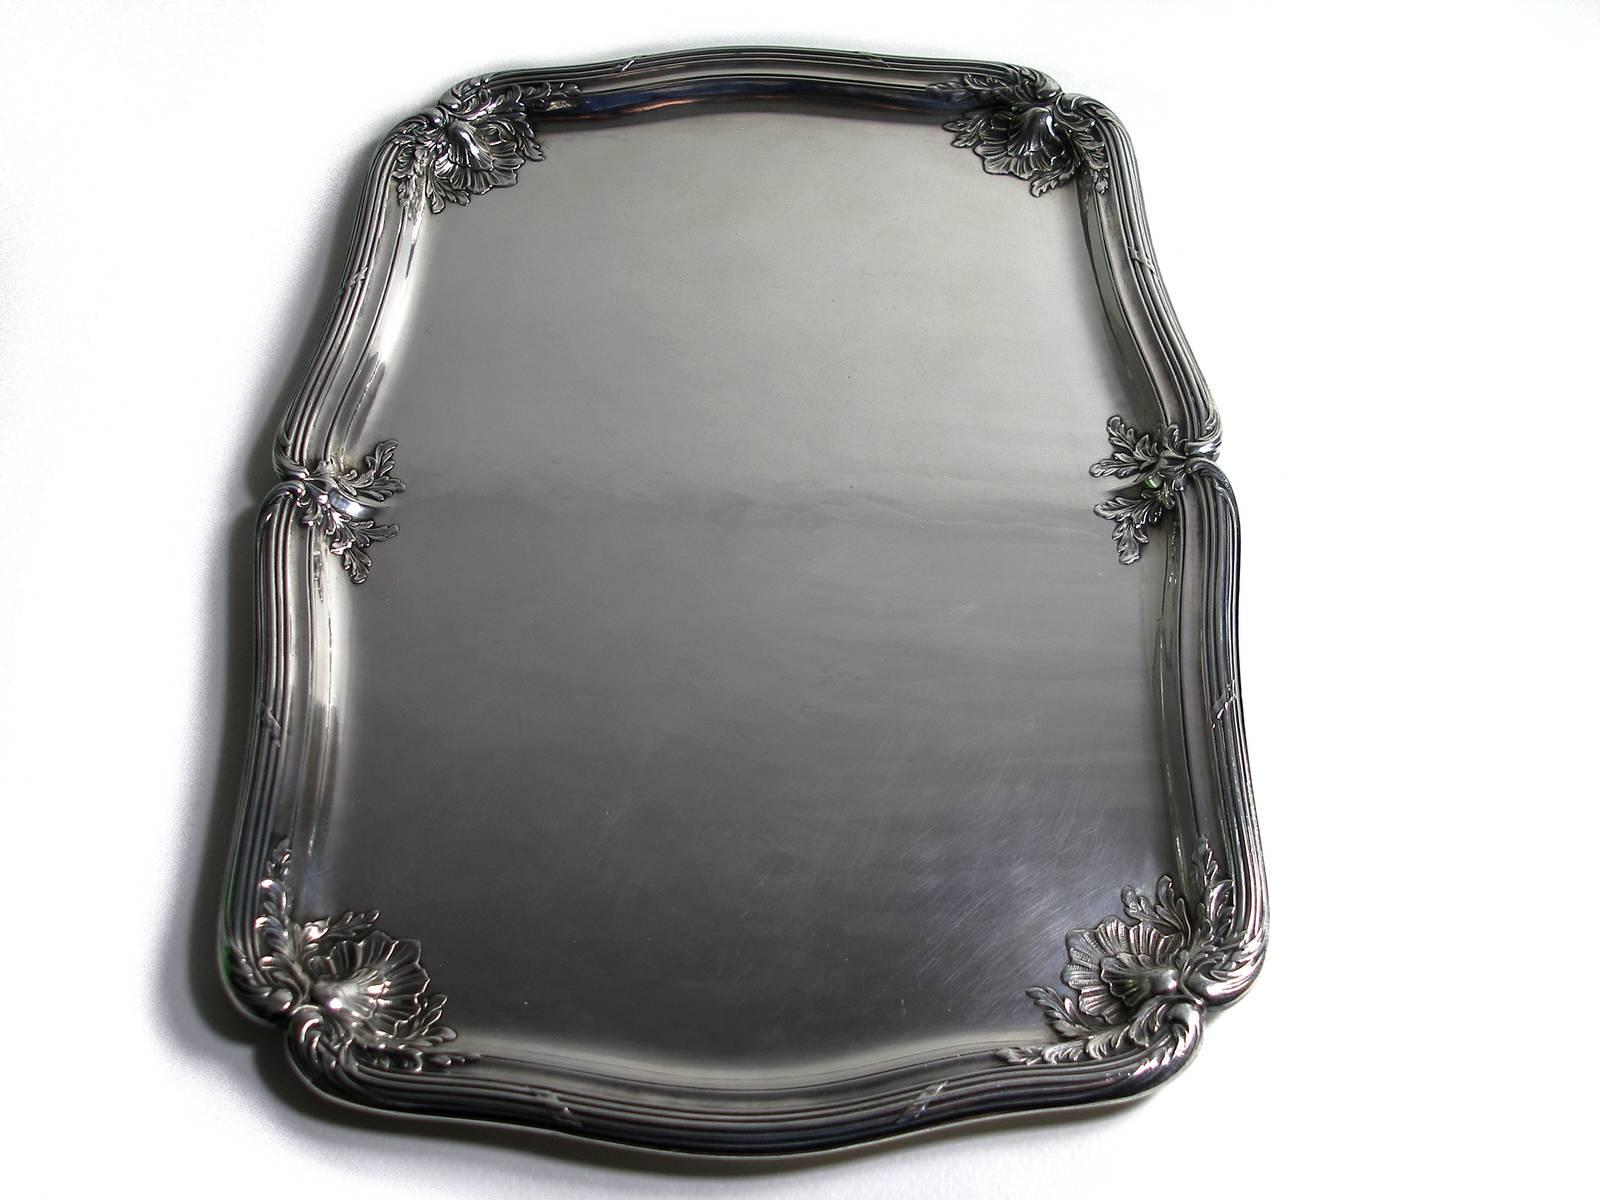 ANTIQUE French Silver Plated GALLIA by christofle Plateau Service Circa 1900 For Sale 2